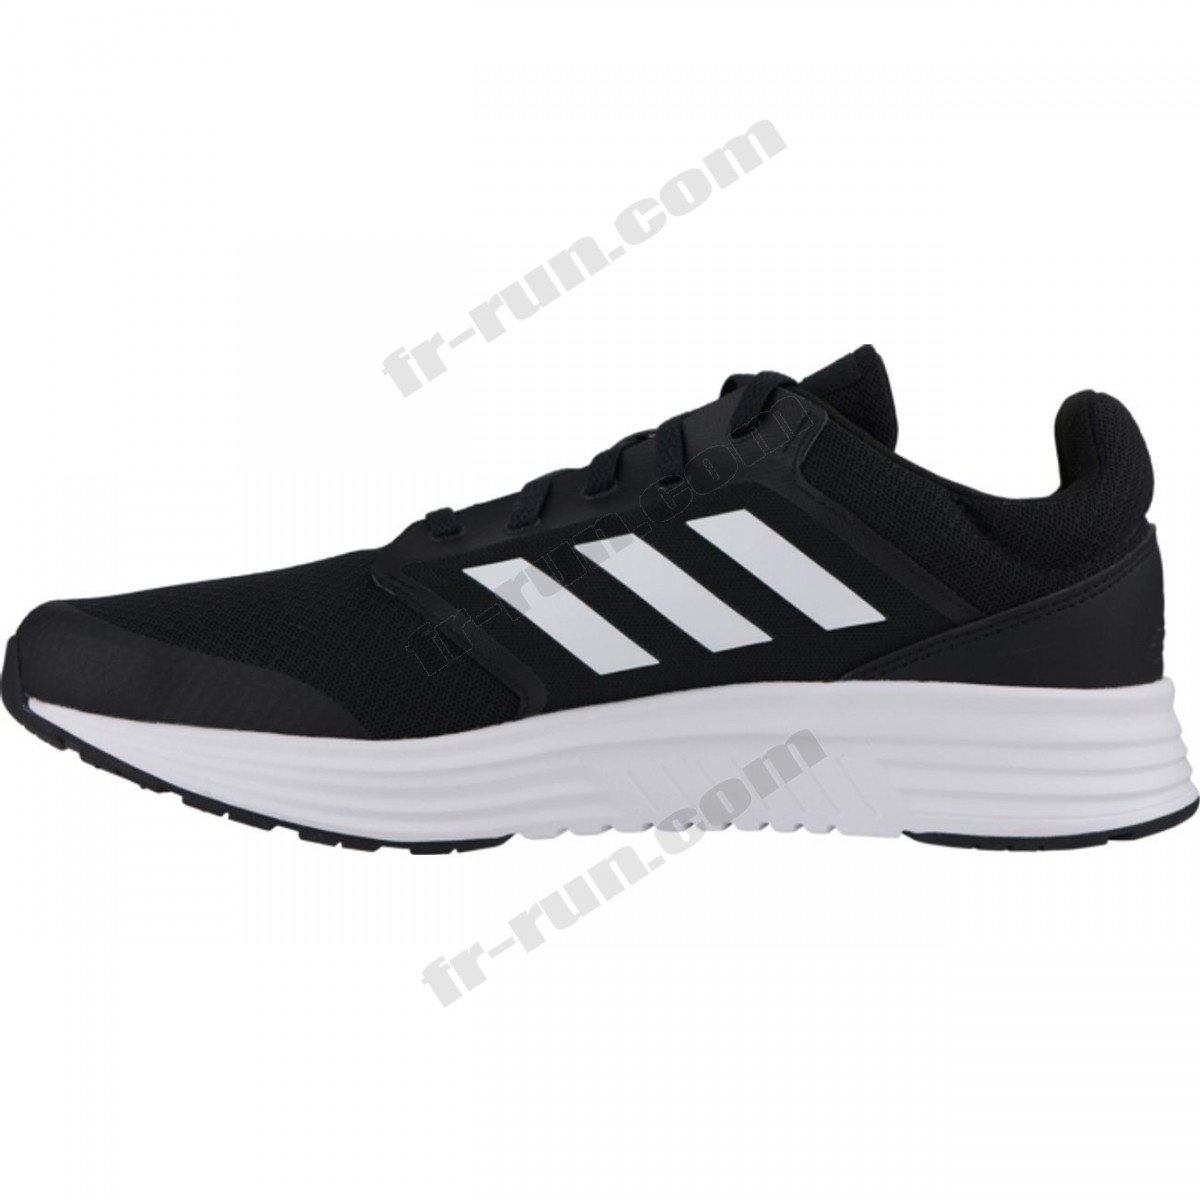 Adidas/CHAUSSURES BASSES running homme ADIDAS GALAXY 5 M √ Nouveau style √ Soldes - -1